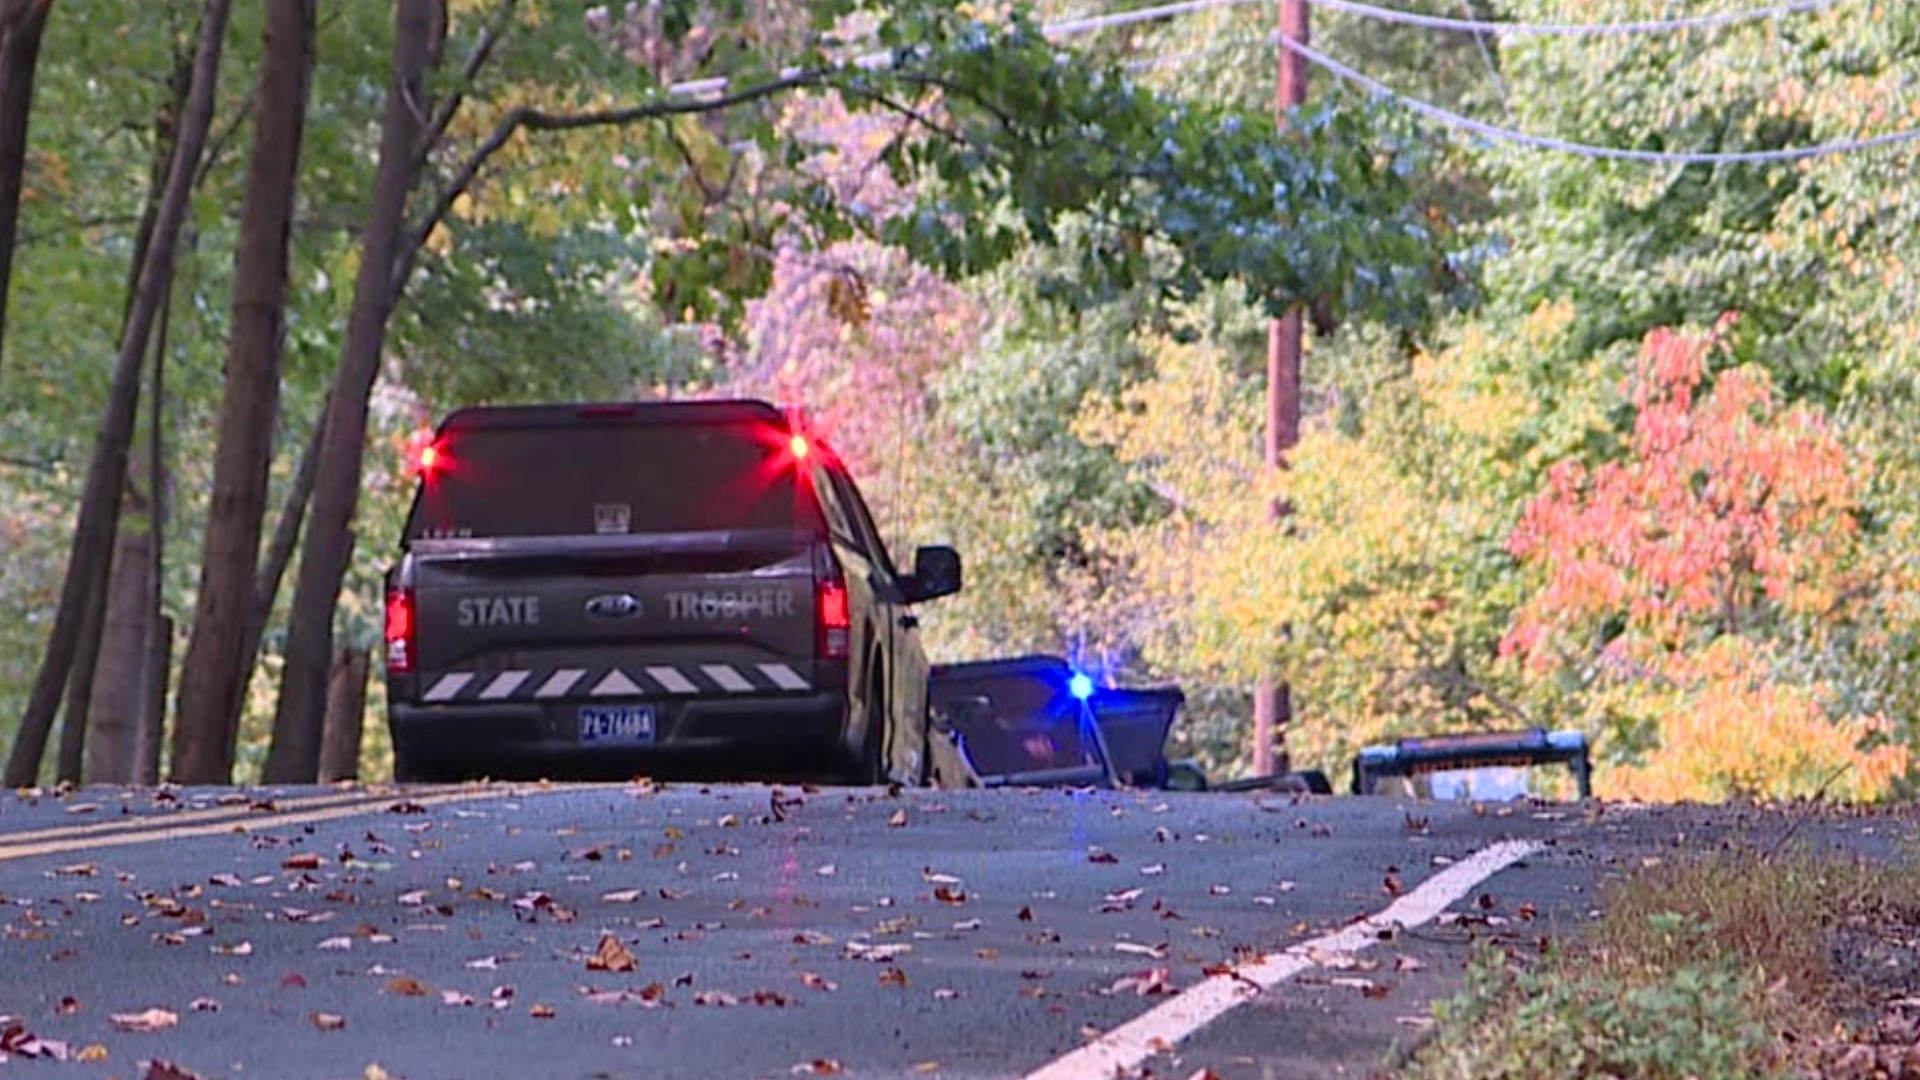 Newswatch 16 obtained search warrants related to the investigation into the homicides of two teenagers in Schuylkill County last week.